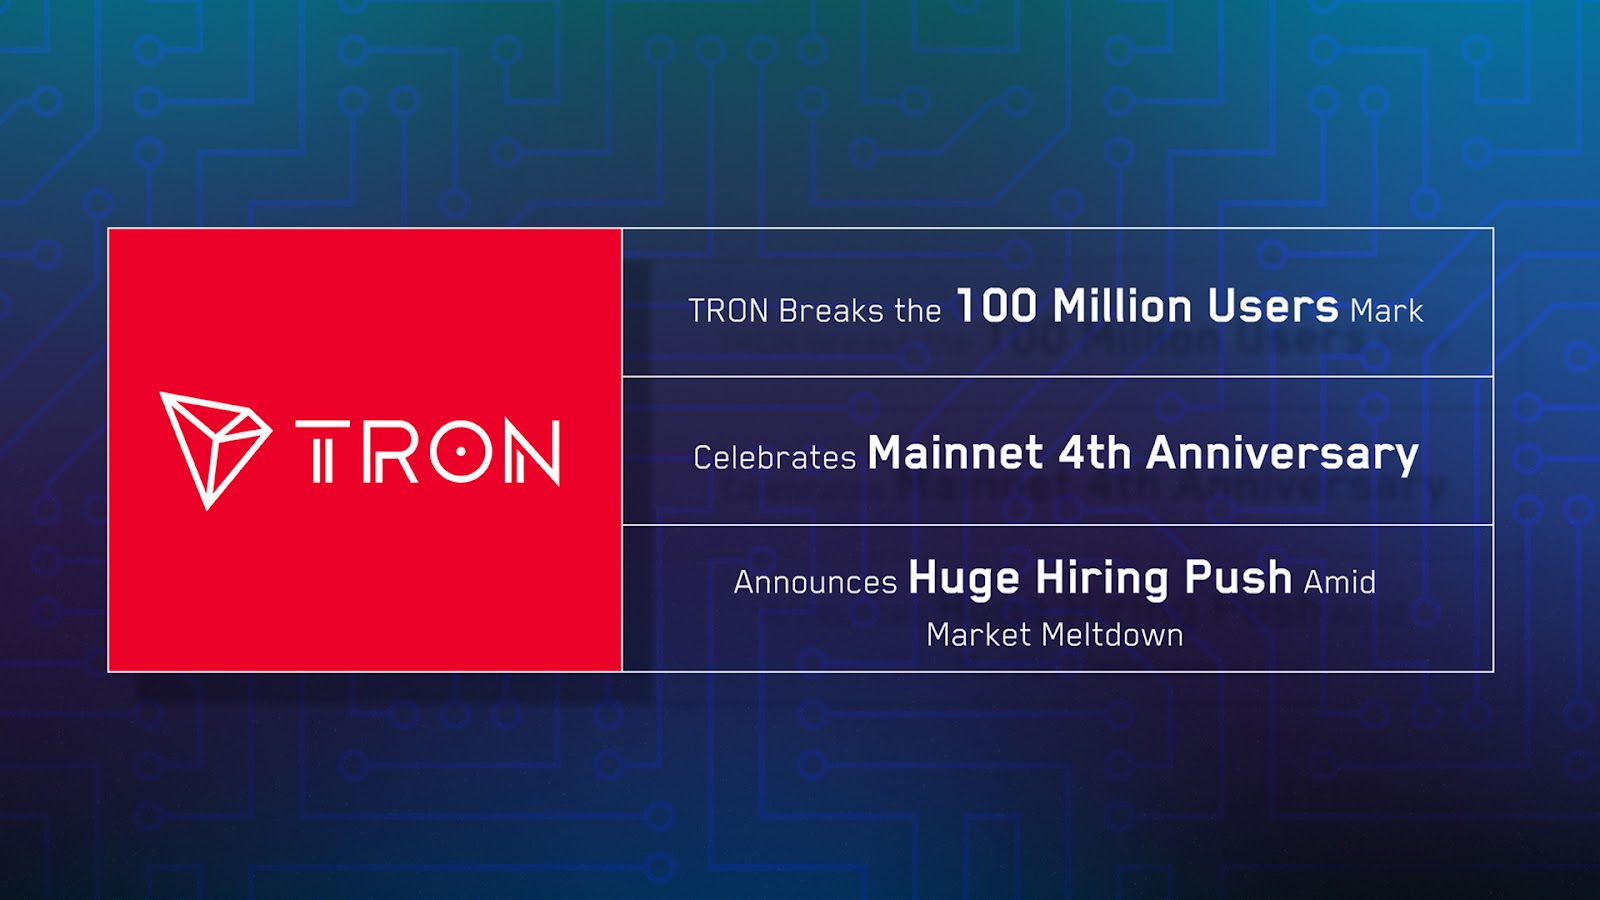 TRON breaks the 100M users mark, celebrates mainnet 4th anniversary, and announces huge hiring push